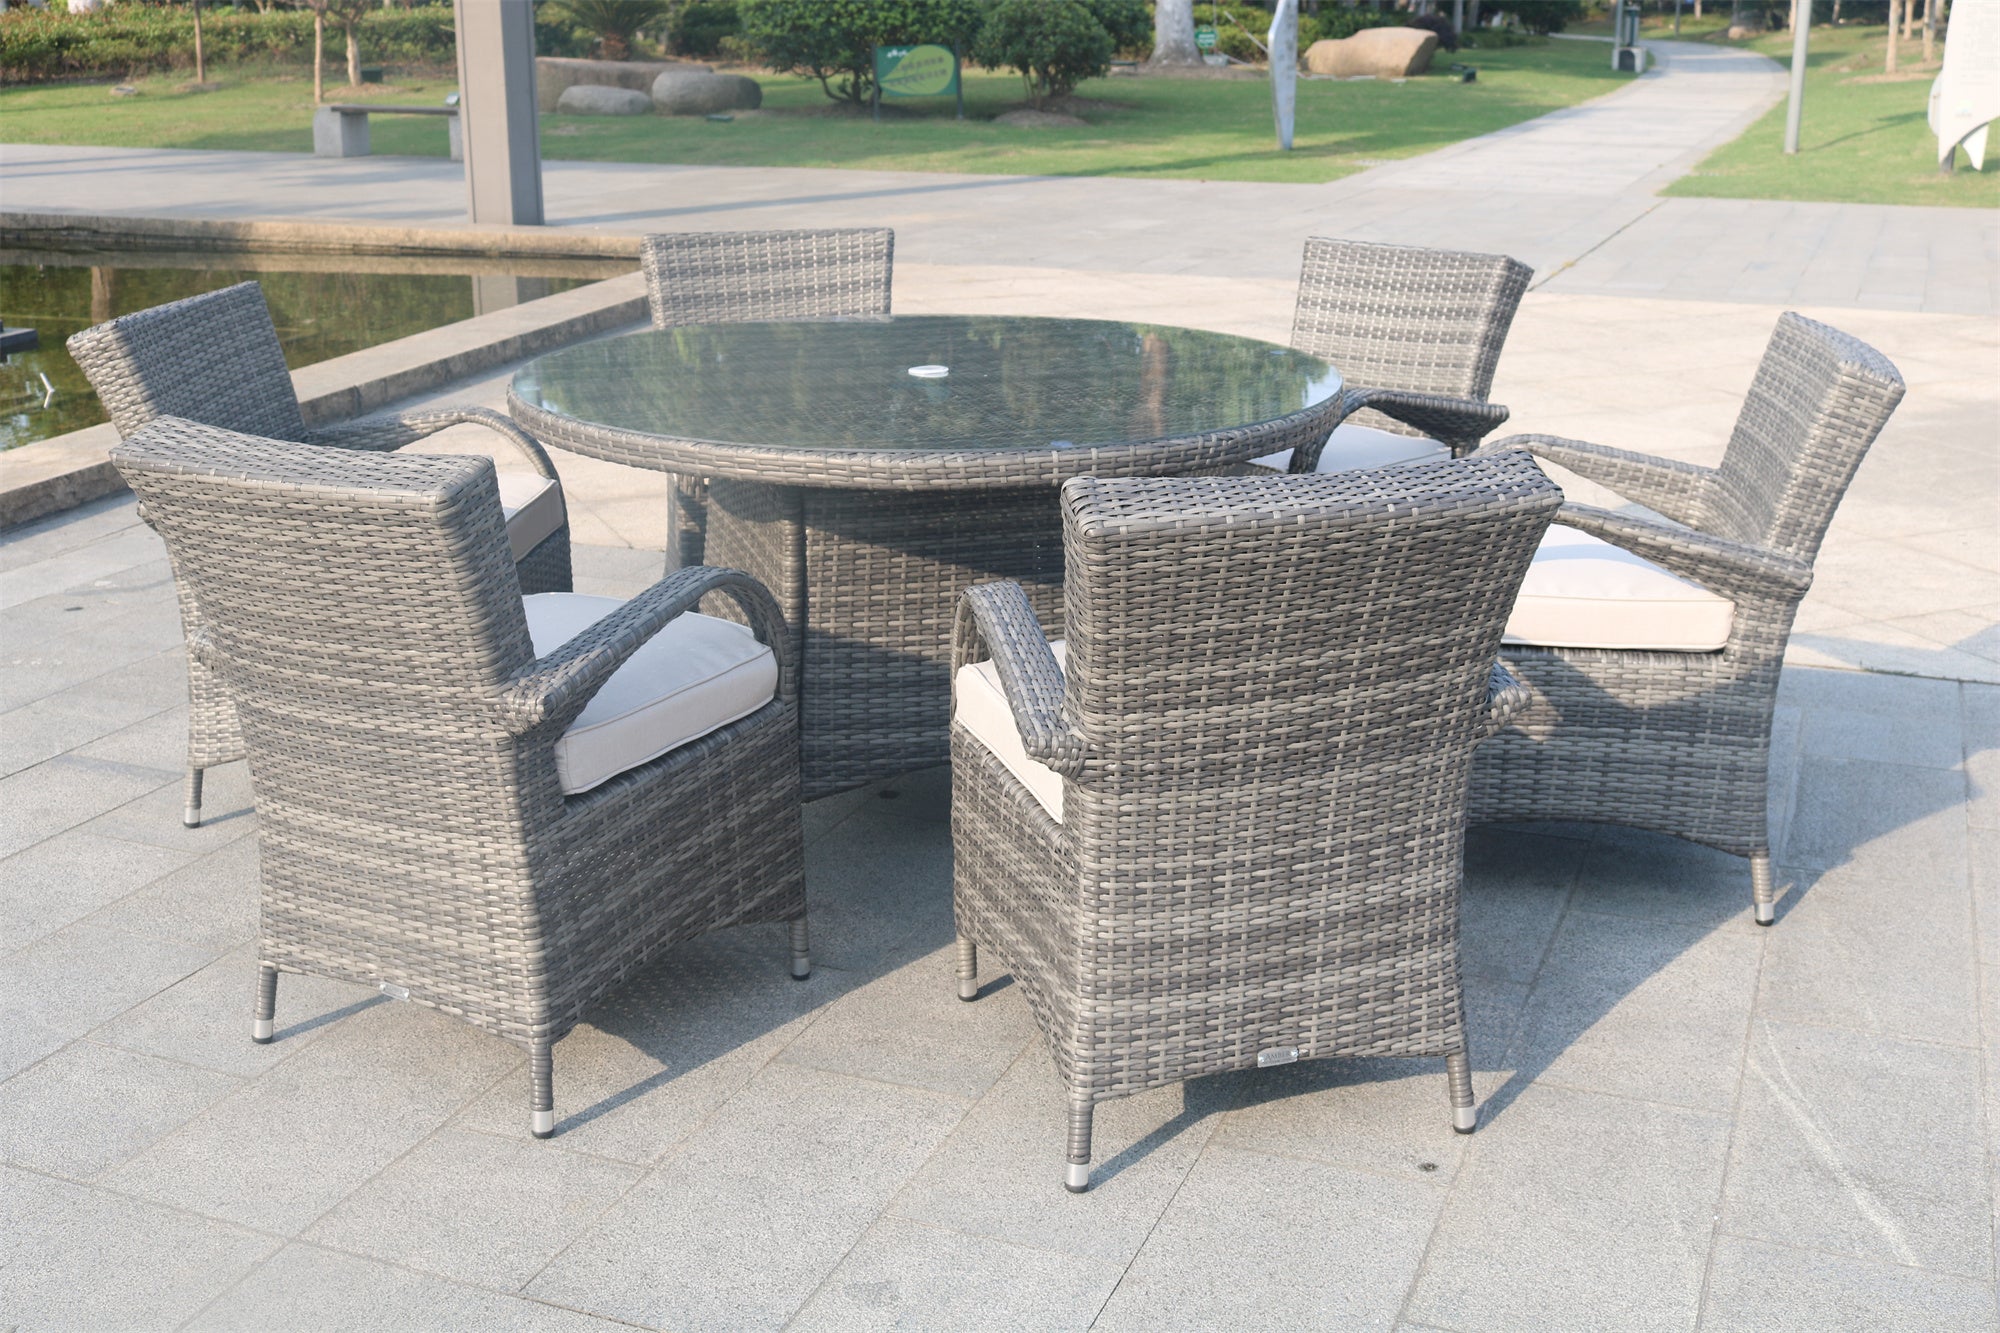 Garden Rattan Outdoor Furniture Patio Brown Wicker 7 Pieces Round Table Patio Dining Set (without umbrella) - Abrihome